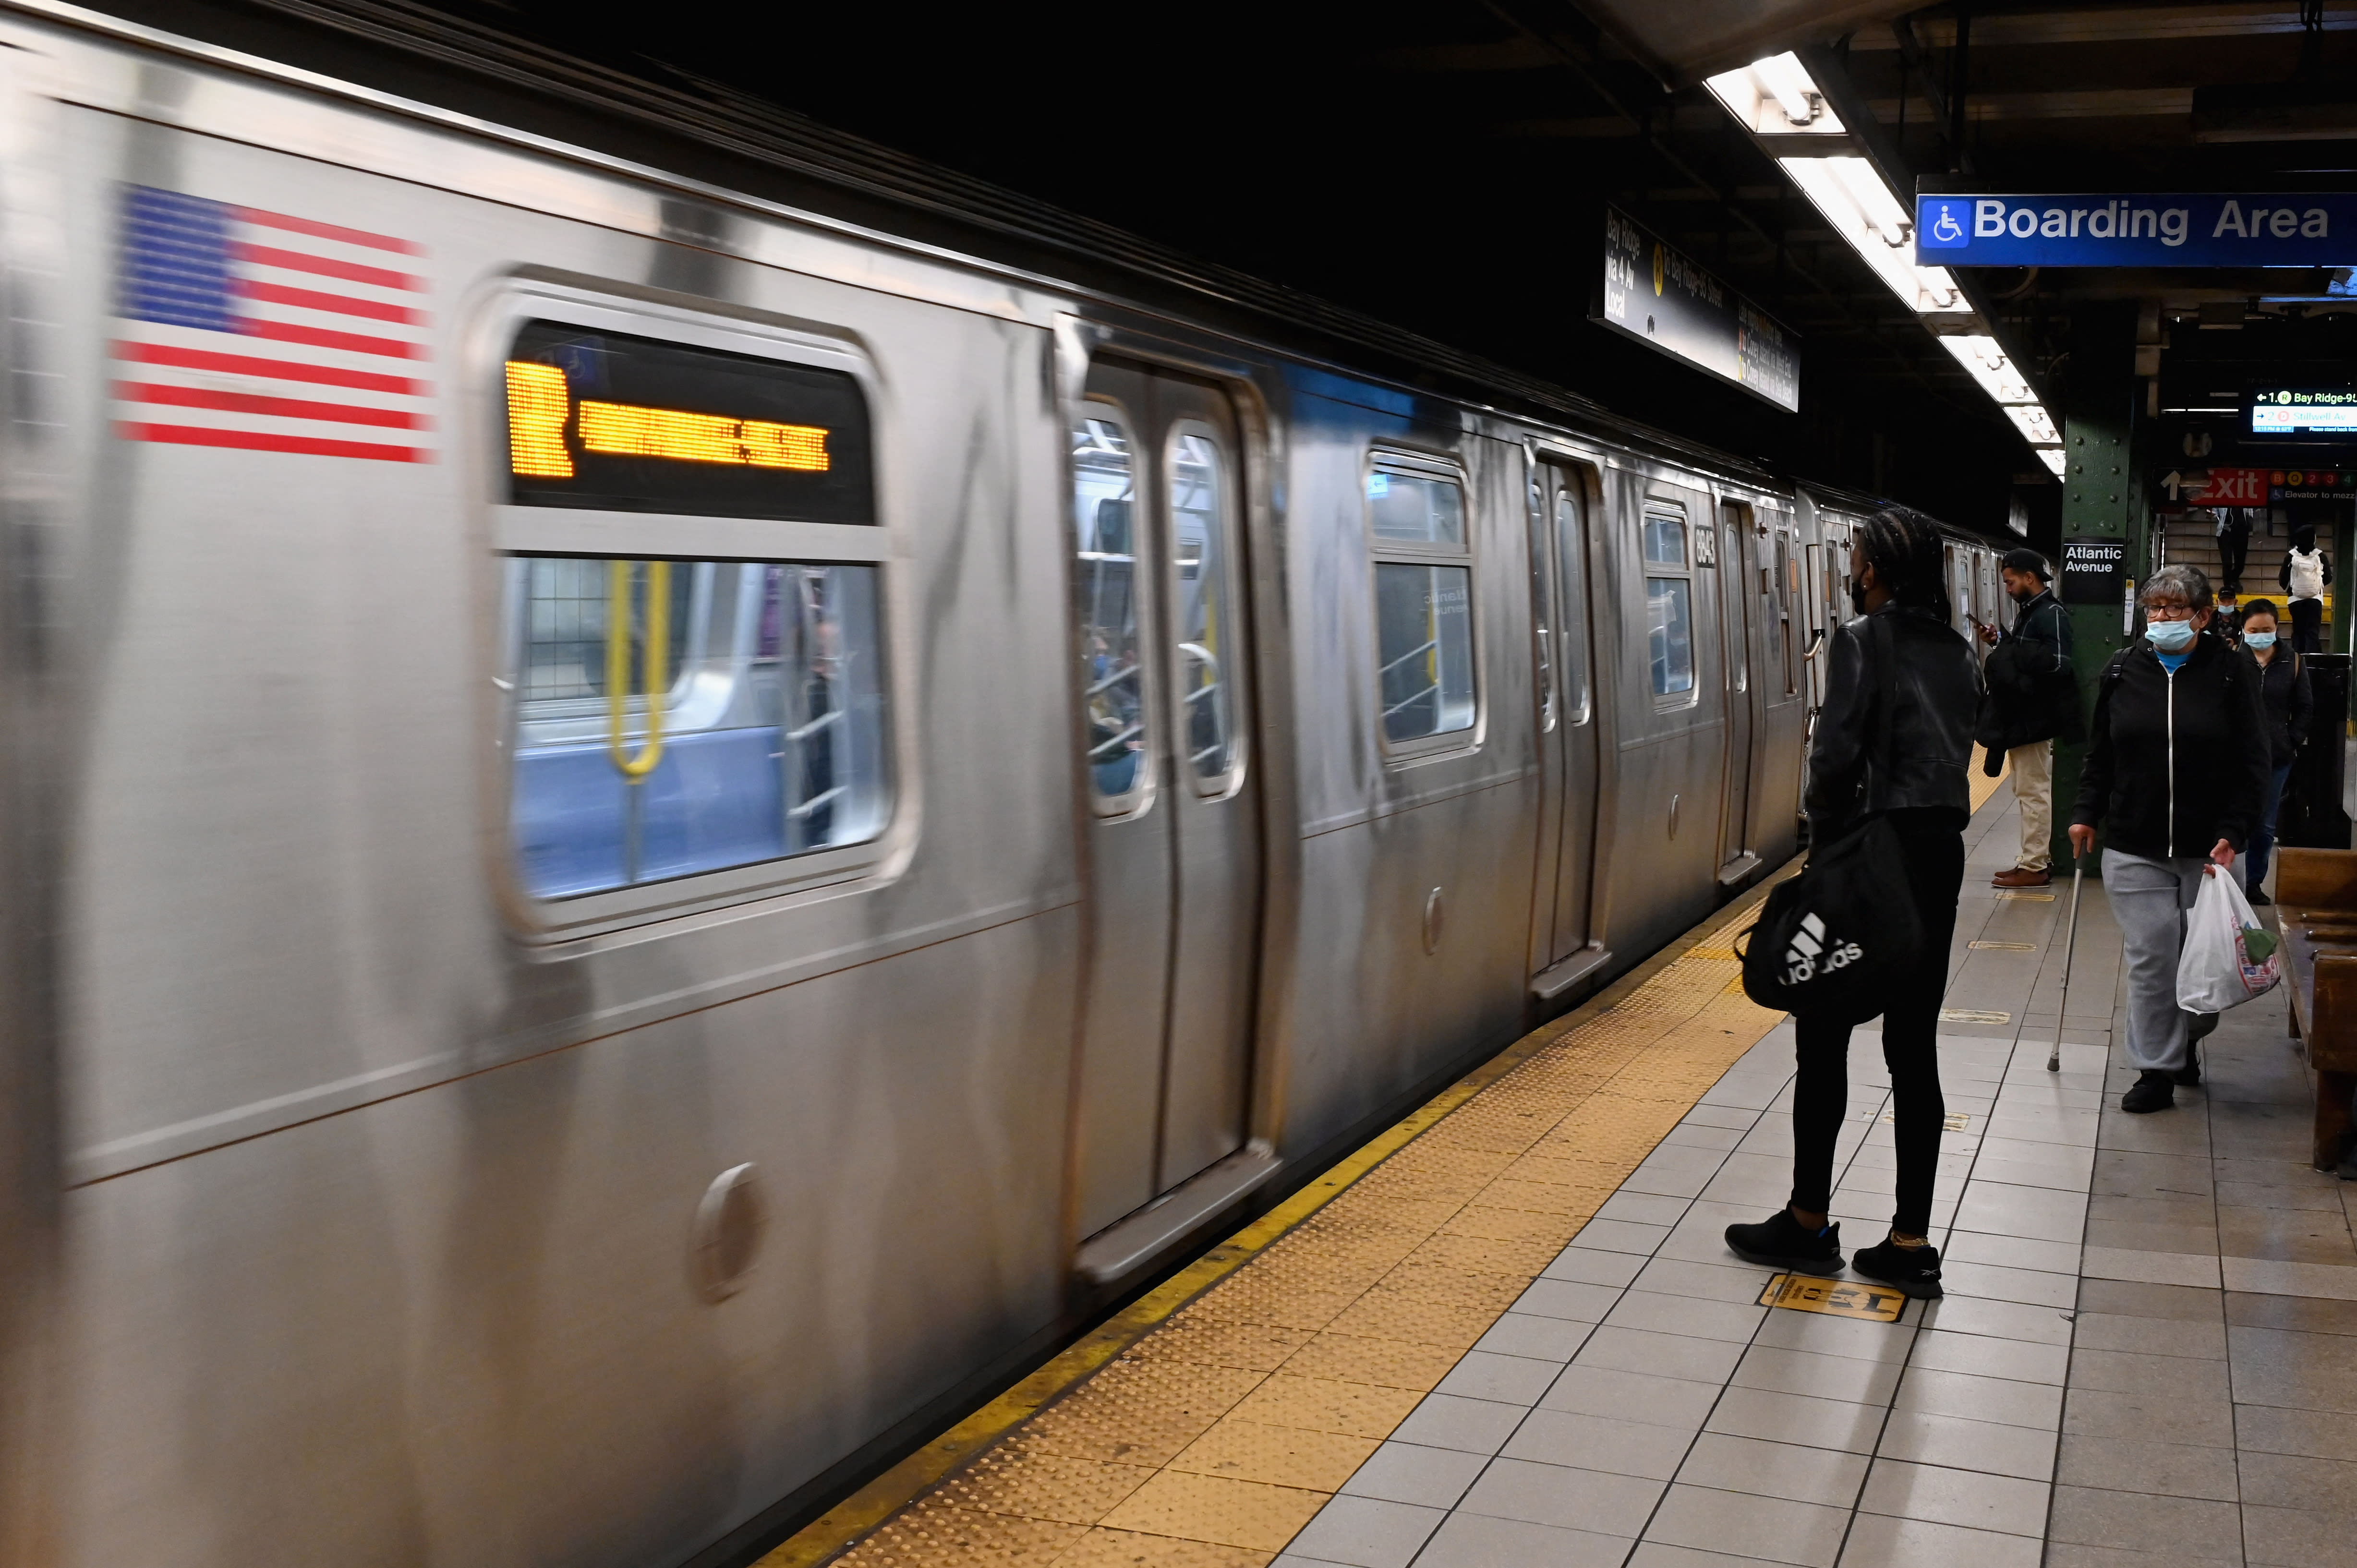 New York City has seen a rise in violence, accompanied by a series of random attacks on subway system riders.